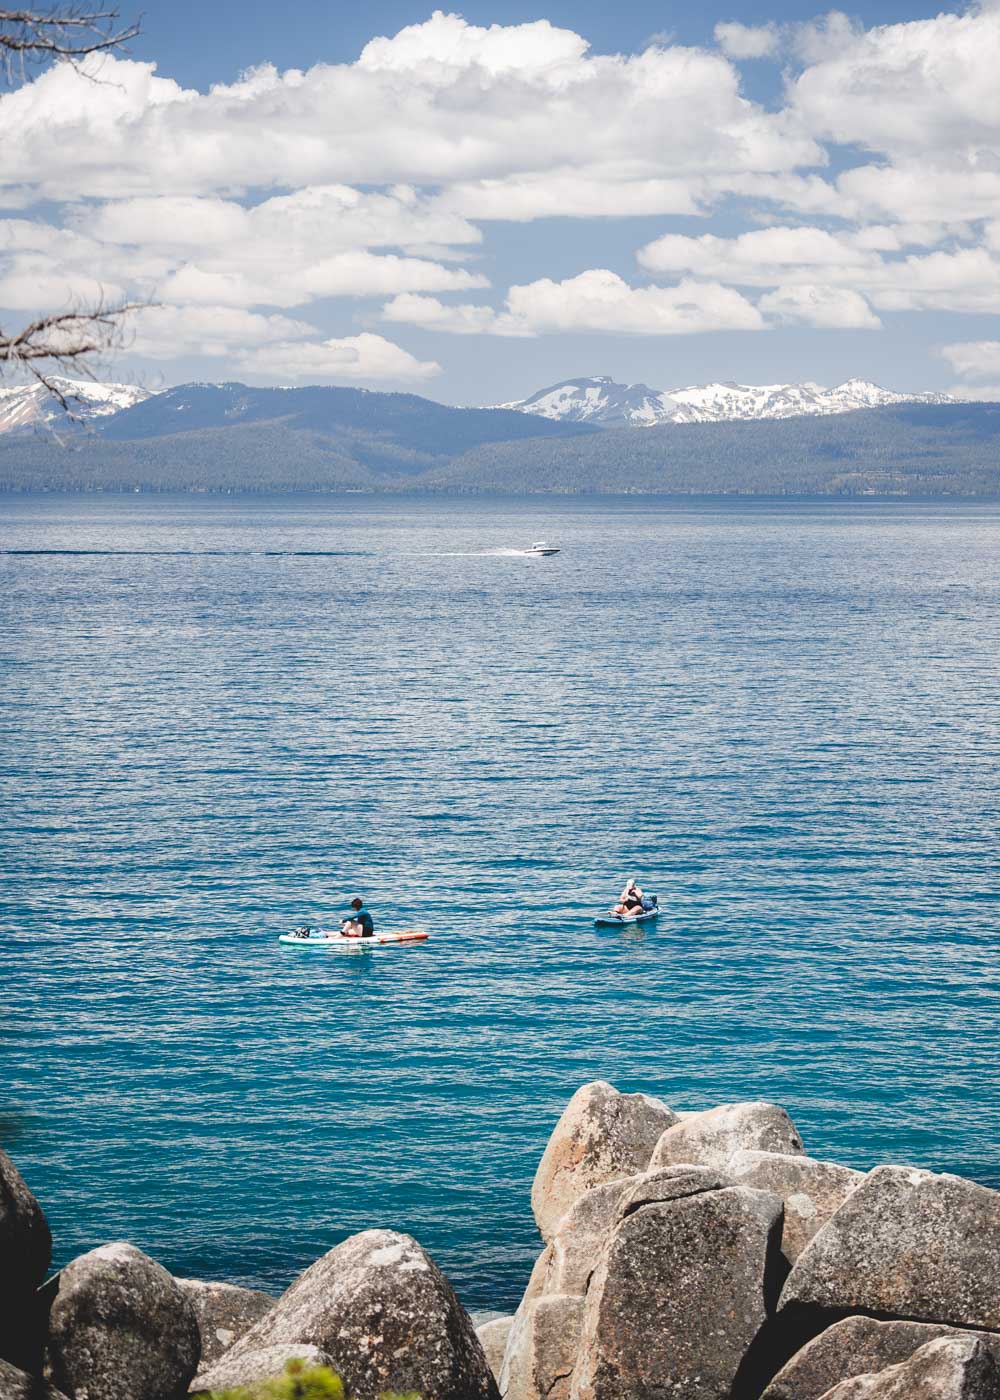 Two people paddle boarding on Lake Tahoe with a speedboat in the background and mountains and clouds in the distance.